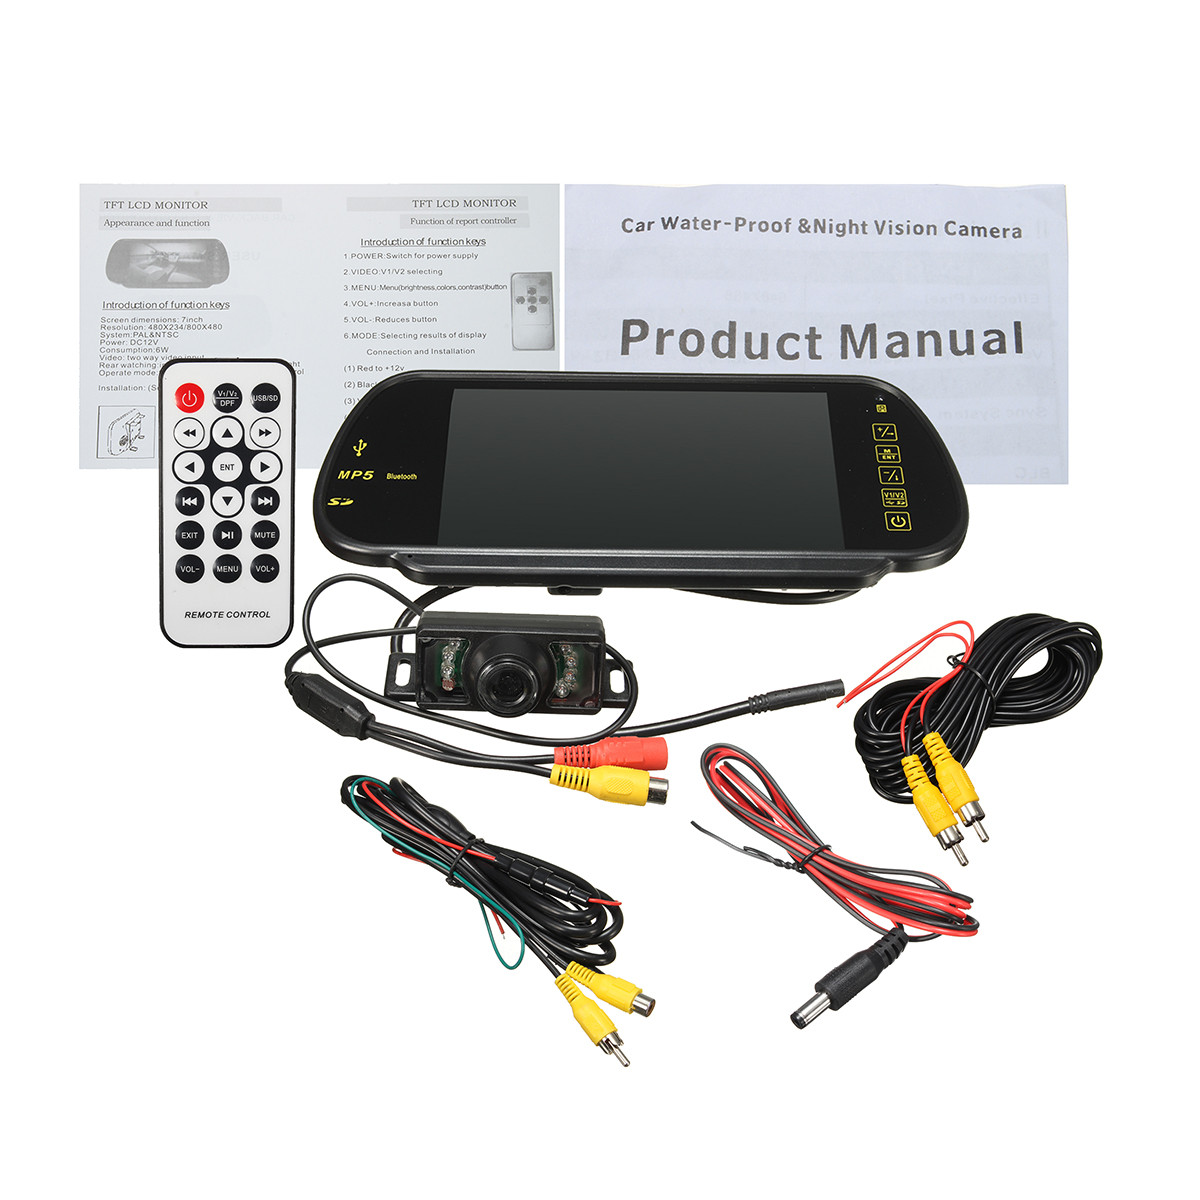 7 inch LCD MP5 bluetooth Car Rear View Parking Mirror Monitor+Reversing Car Camera Remote Controller View Video Monitor